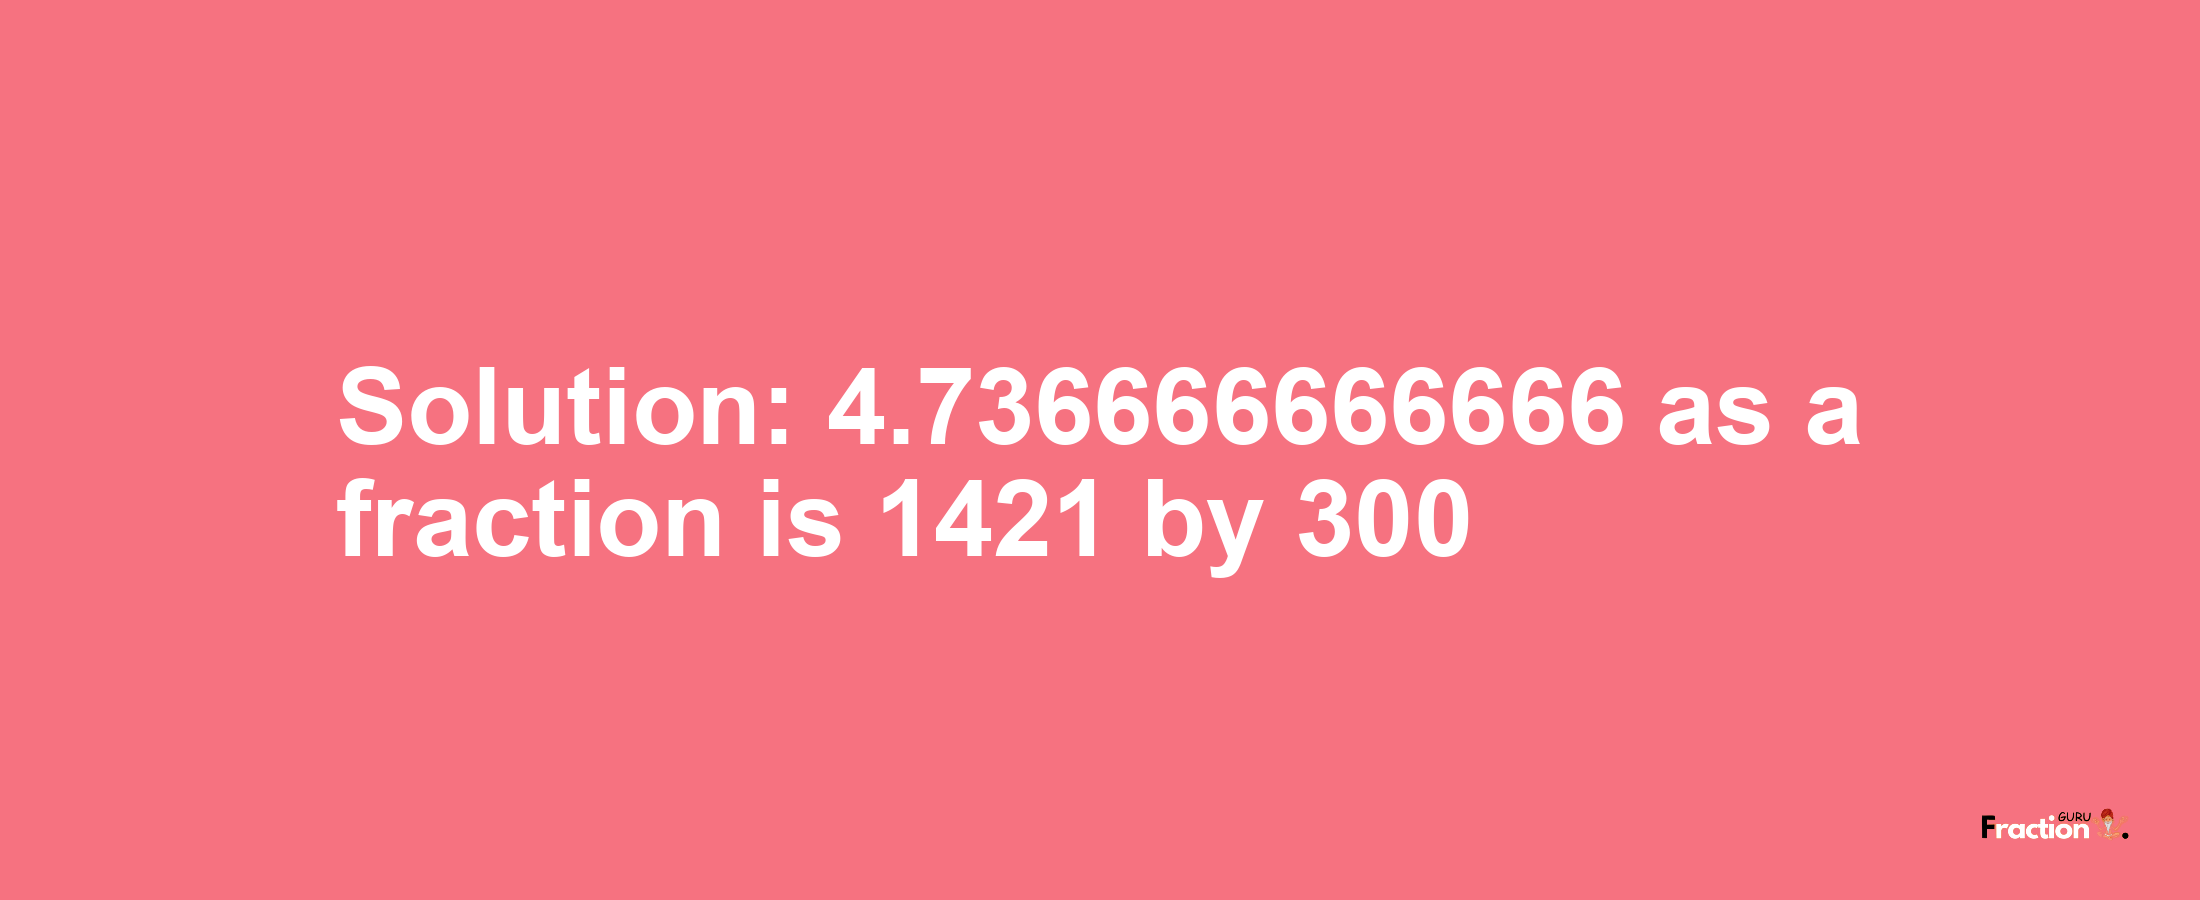 Solution:4.736666666666 as a fraction is 1421/300